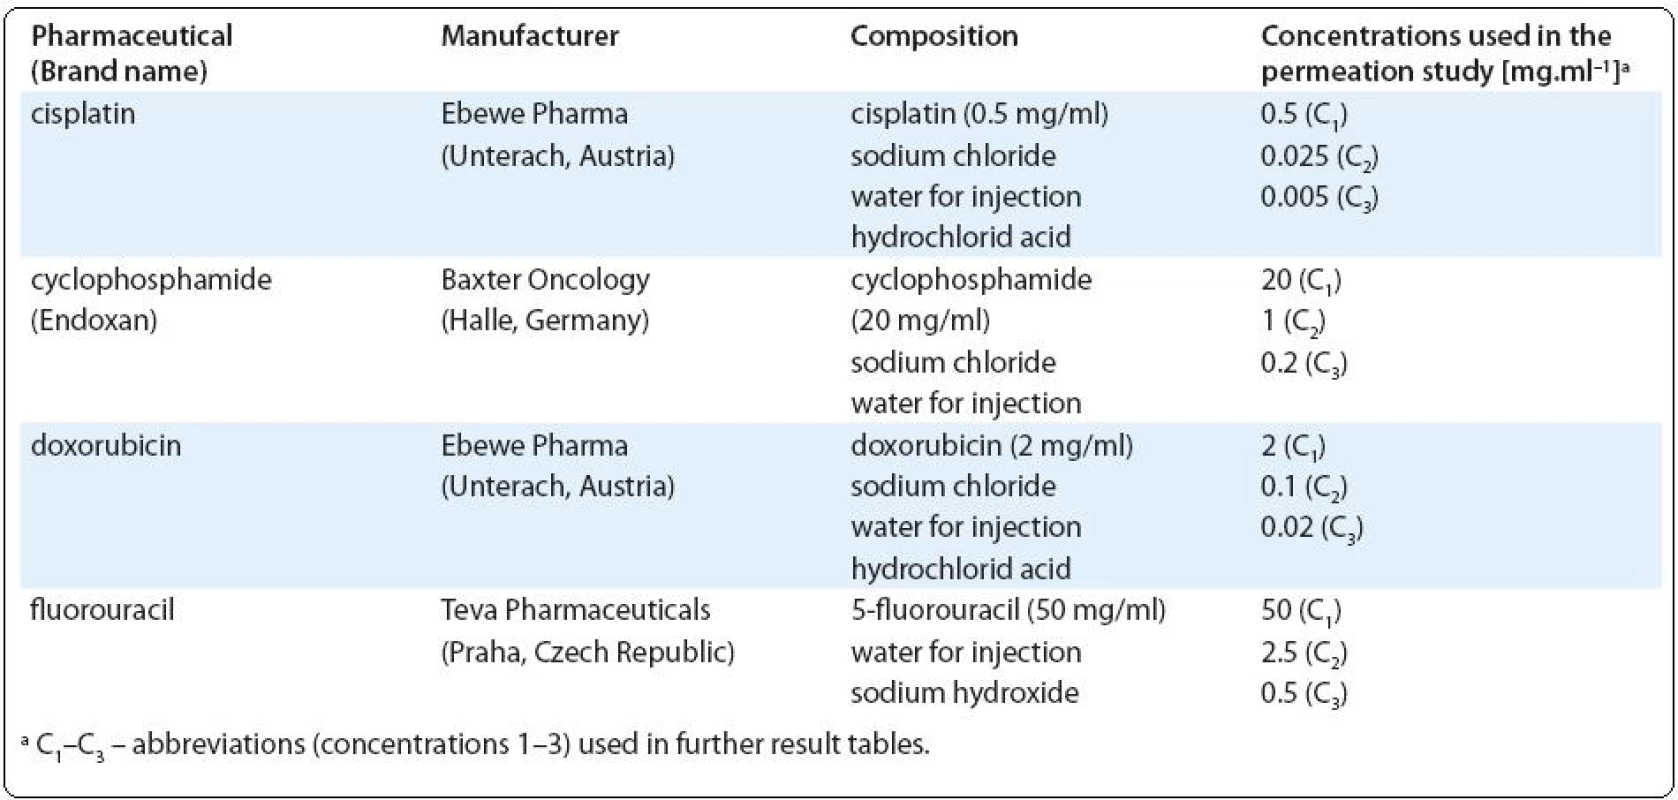 Characterization of the cytotoxic drugs used in the present study.